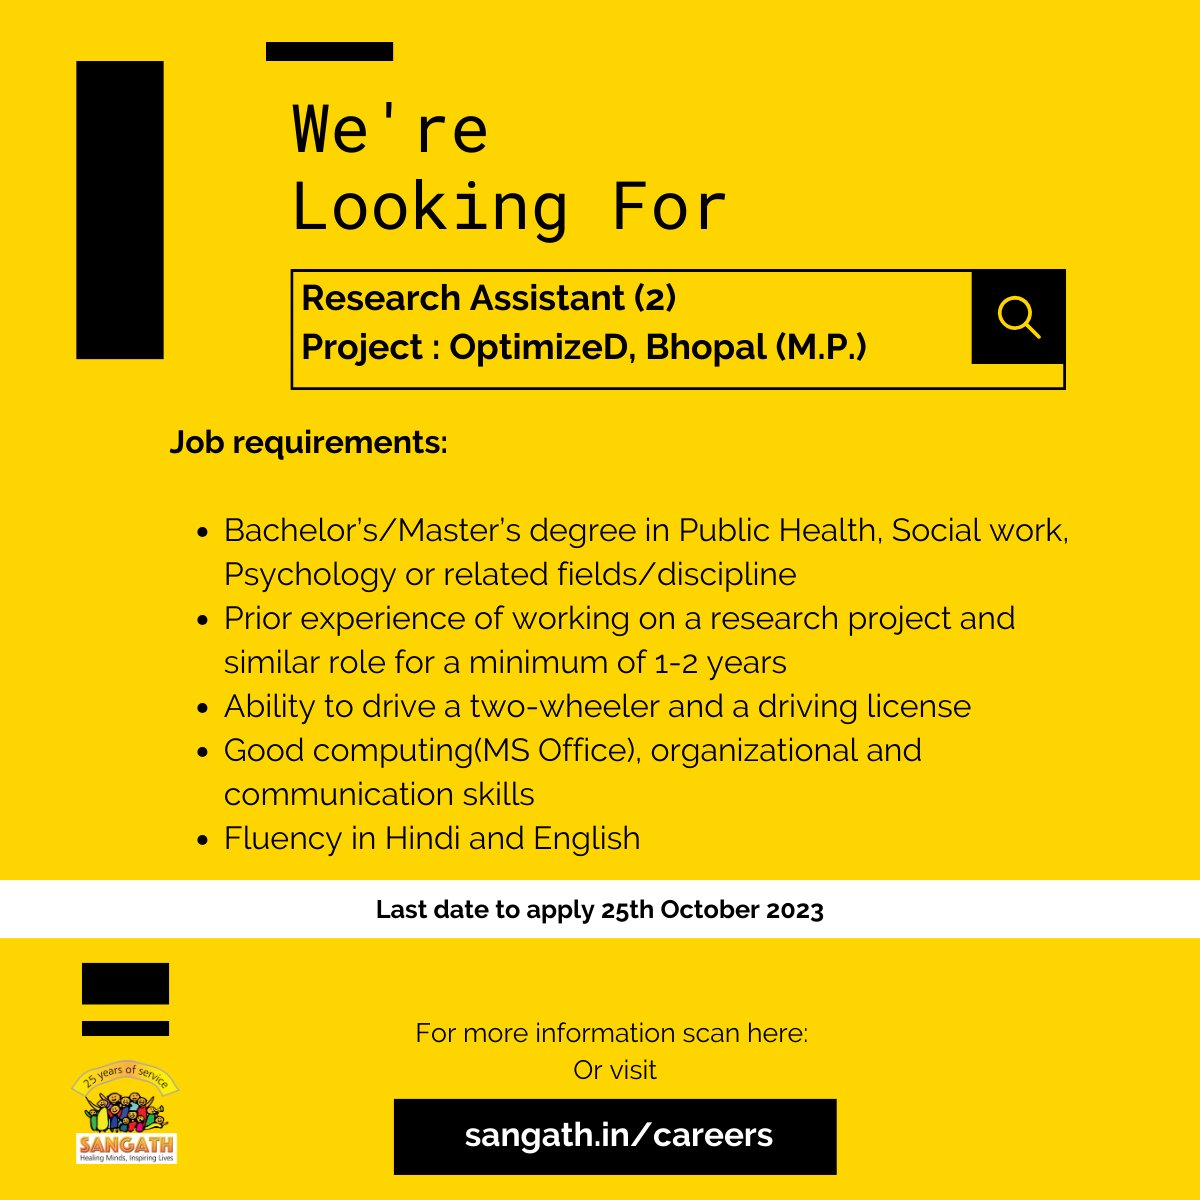 We are looking for Research Assistants for our OptimizeD Project. Location: Bhopal, Madhya Pradesh Position : 02 Apply before 25th October 2023, through google link bit.ly/OptimiseDRA For details, visit sangath.in/careers/ #hiringnow #hiringimmediately #ngoindia #bhopal